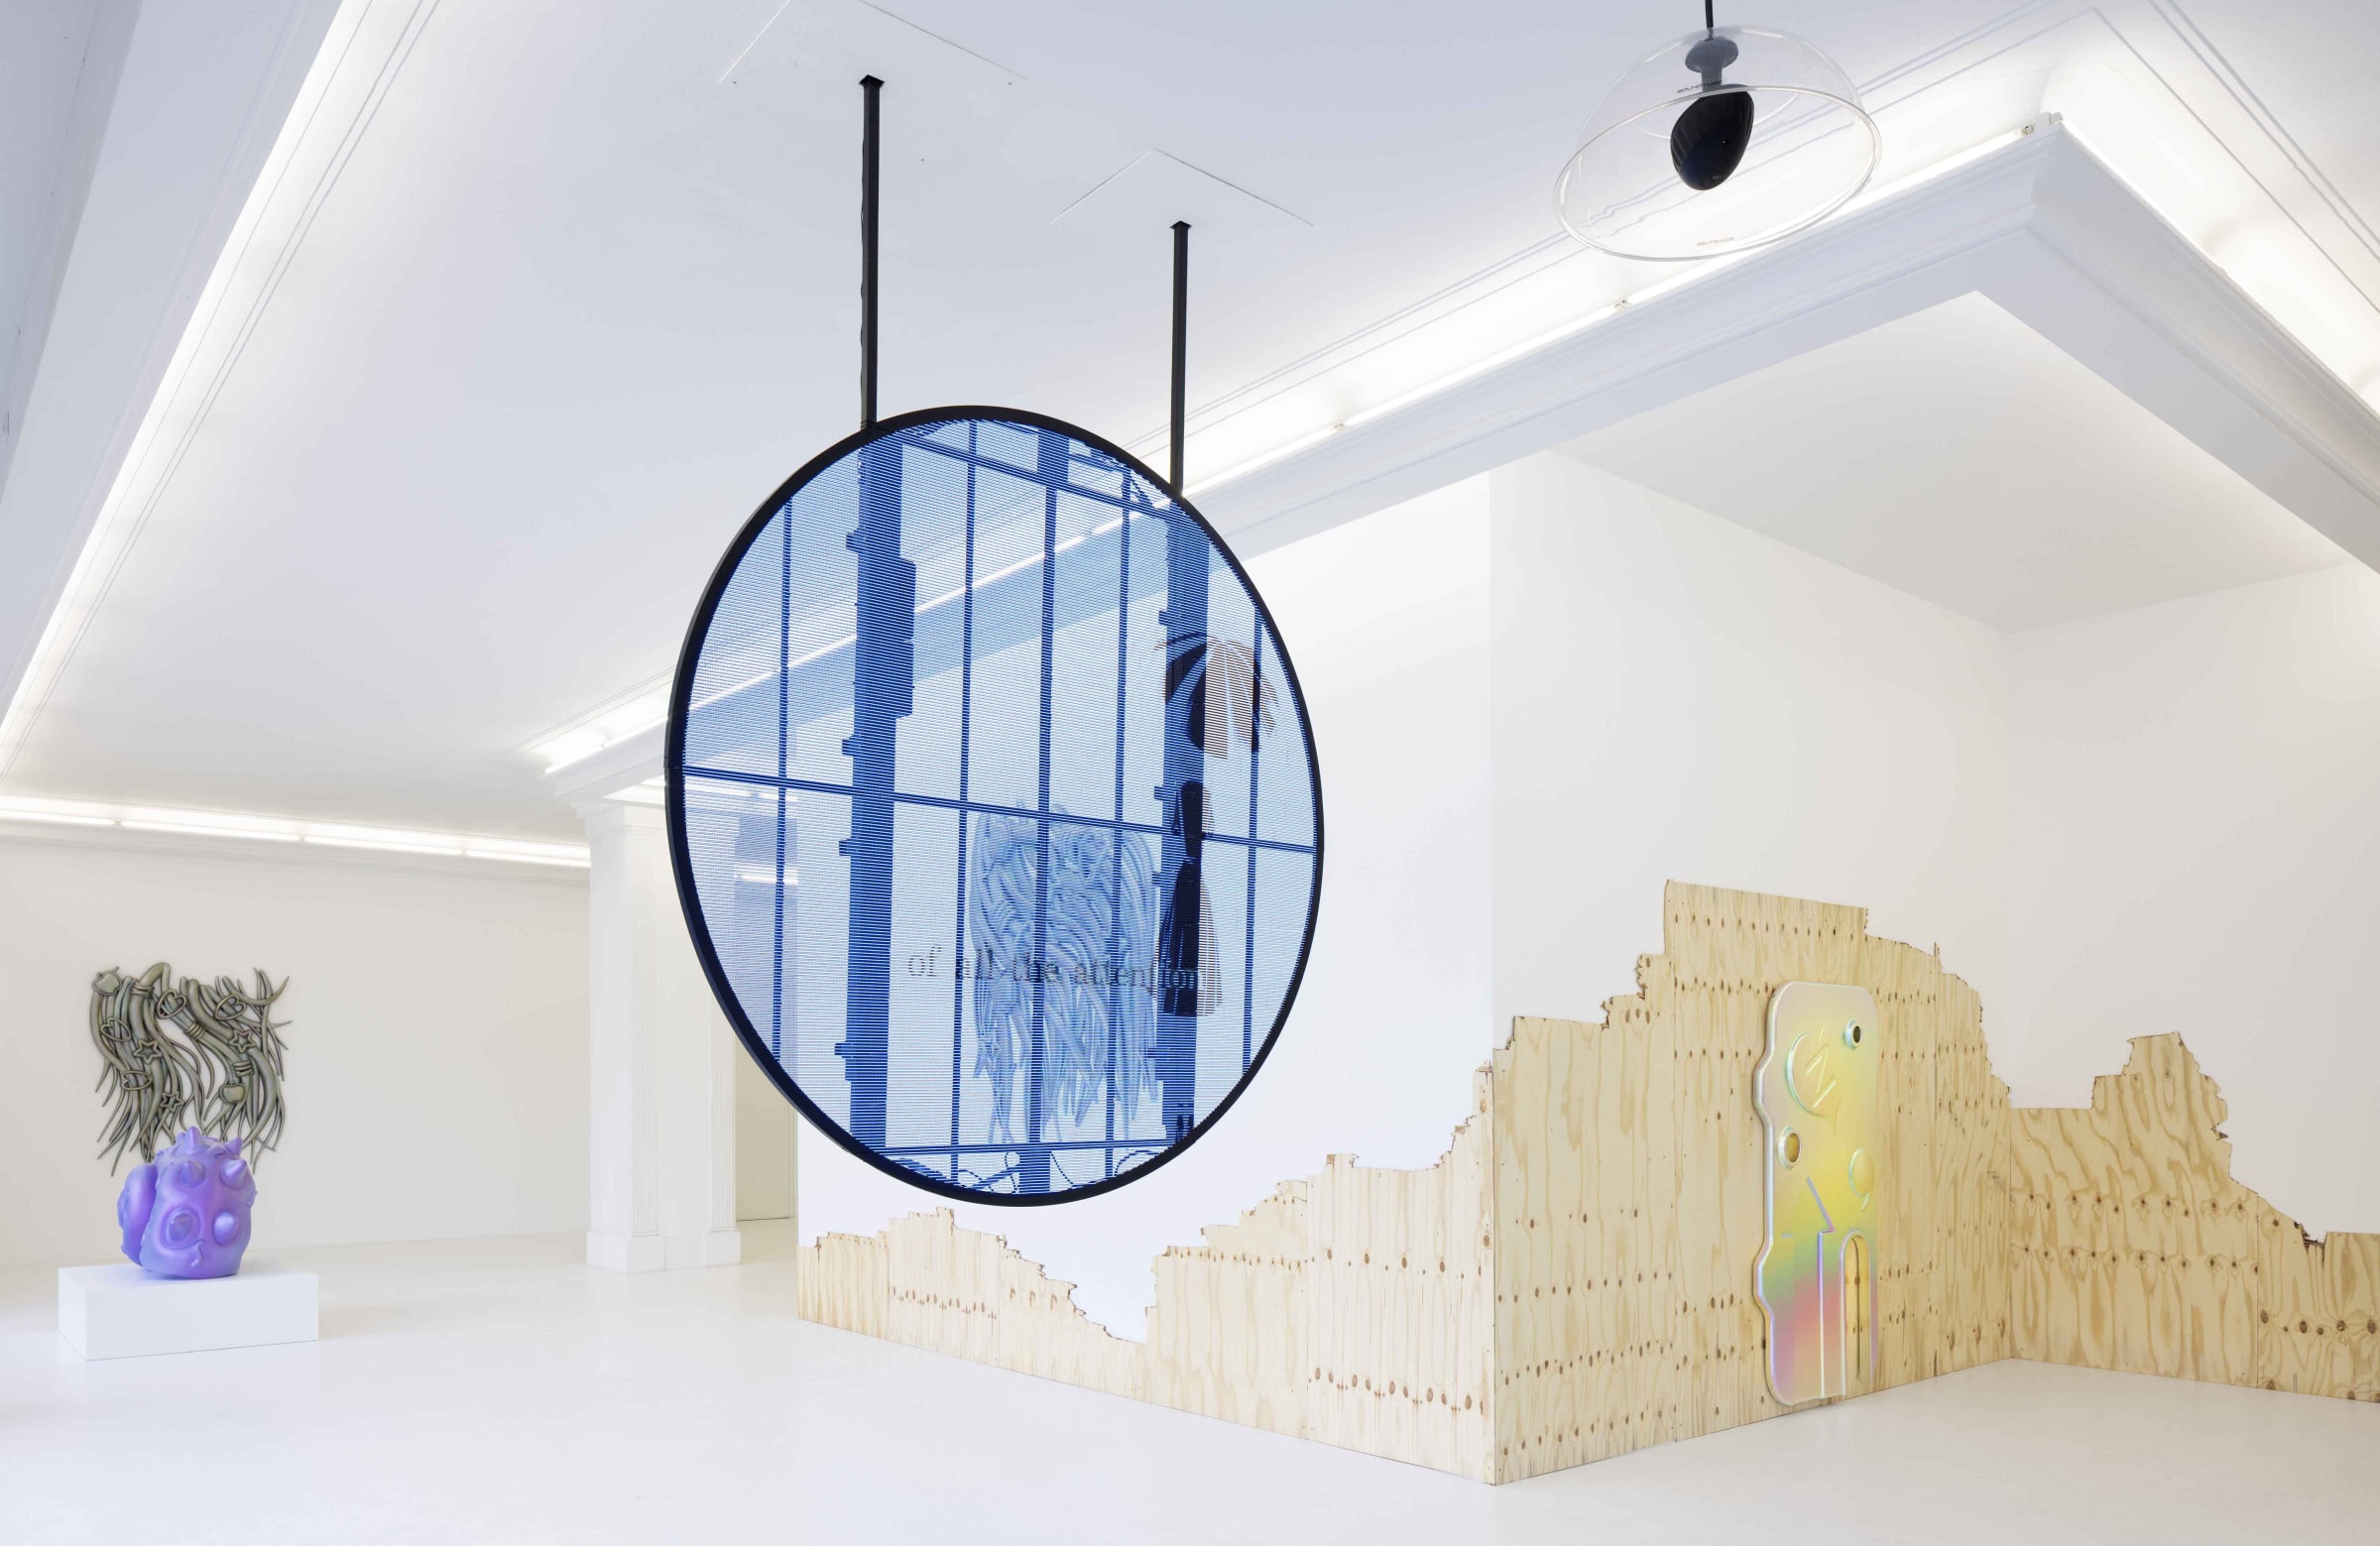 Shuang Li nobody’s home Installation View April 29 – May 27, 2022 Peres Projects, Berlin Photographed by: Timo Ohler